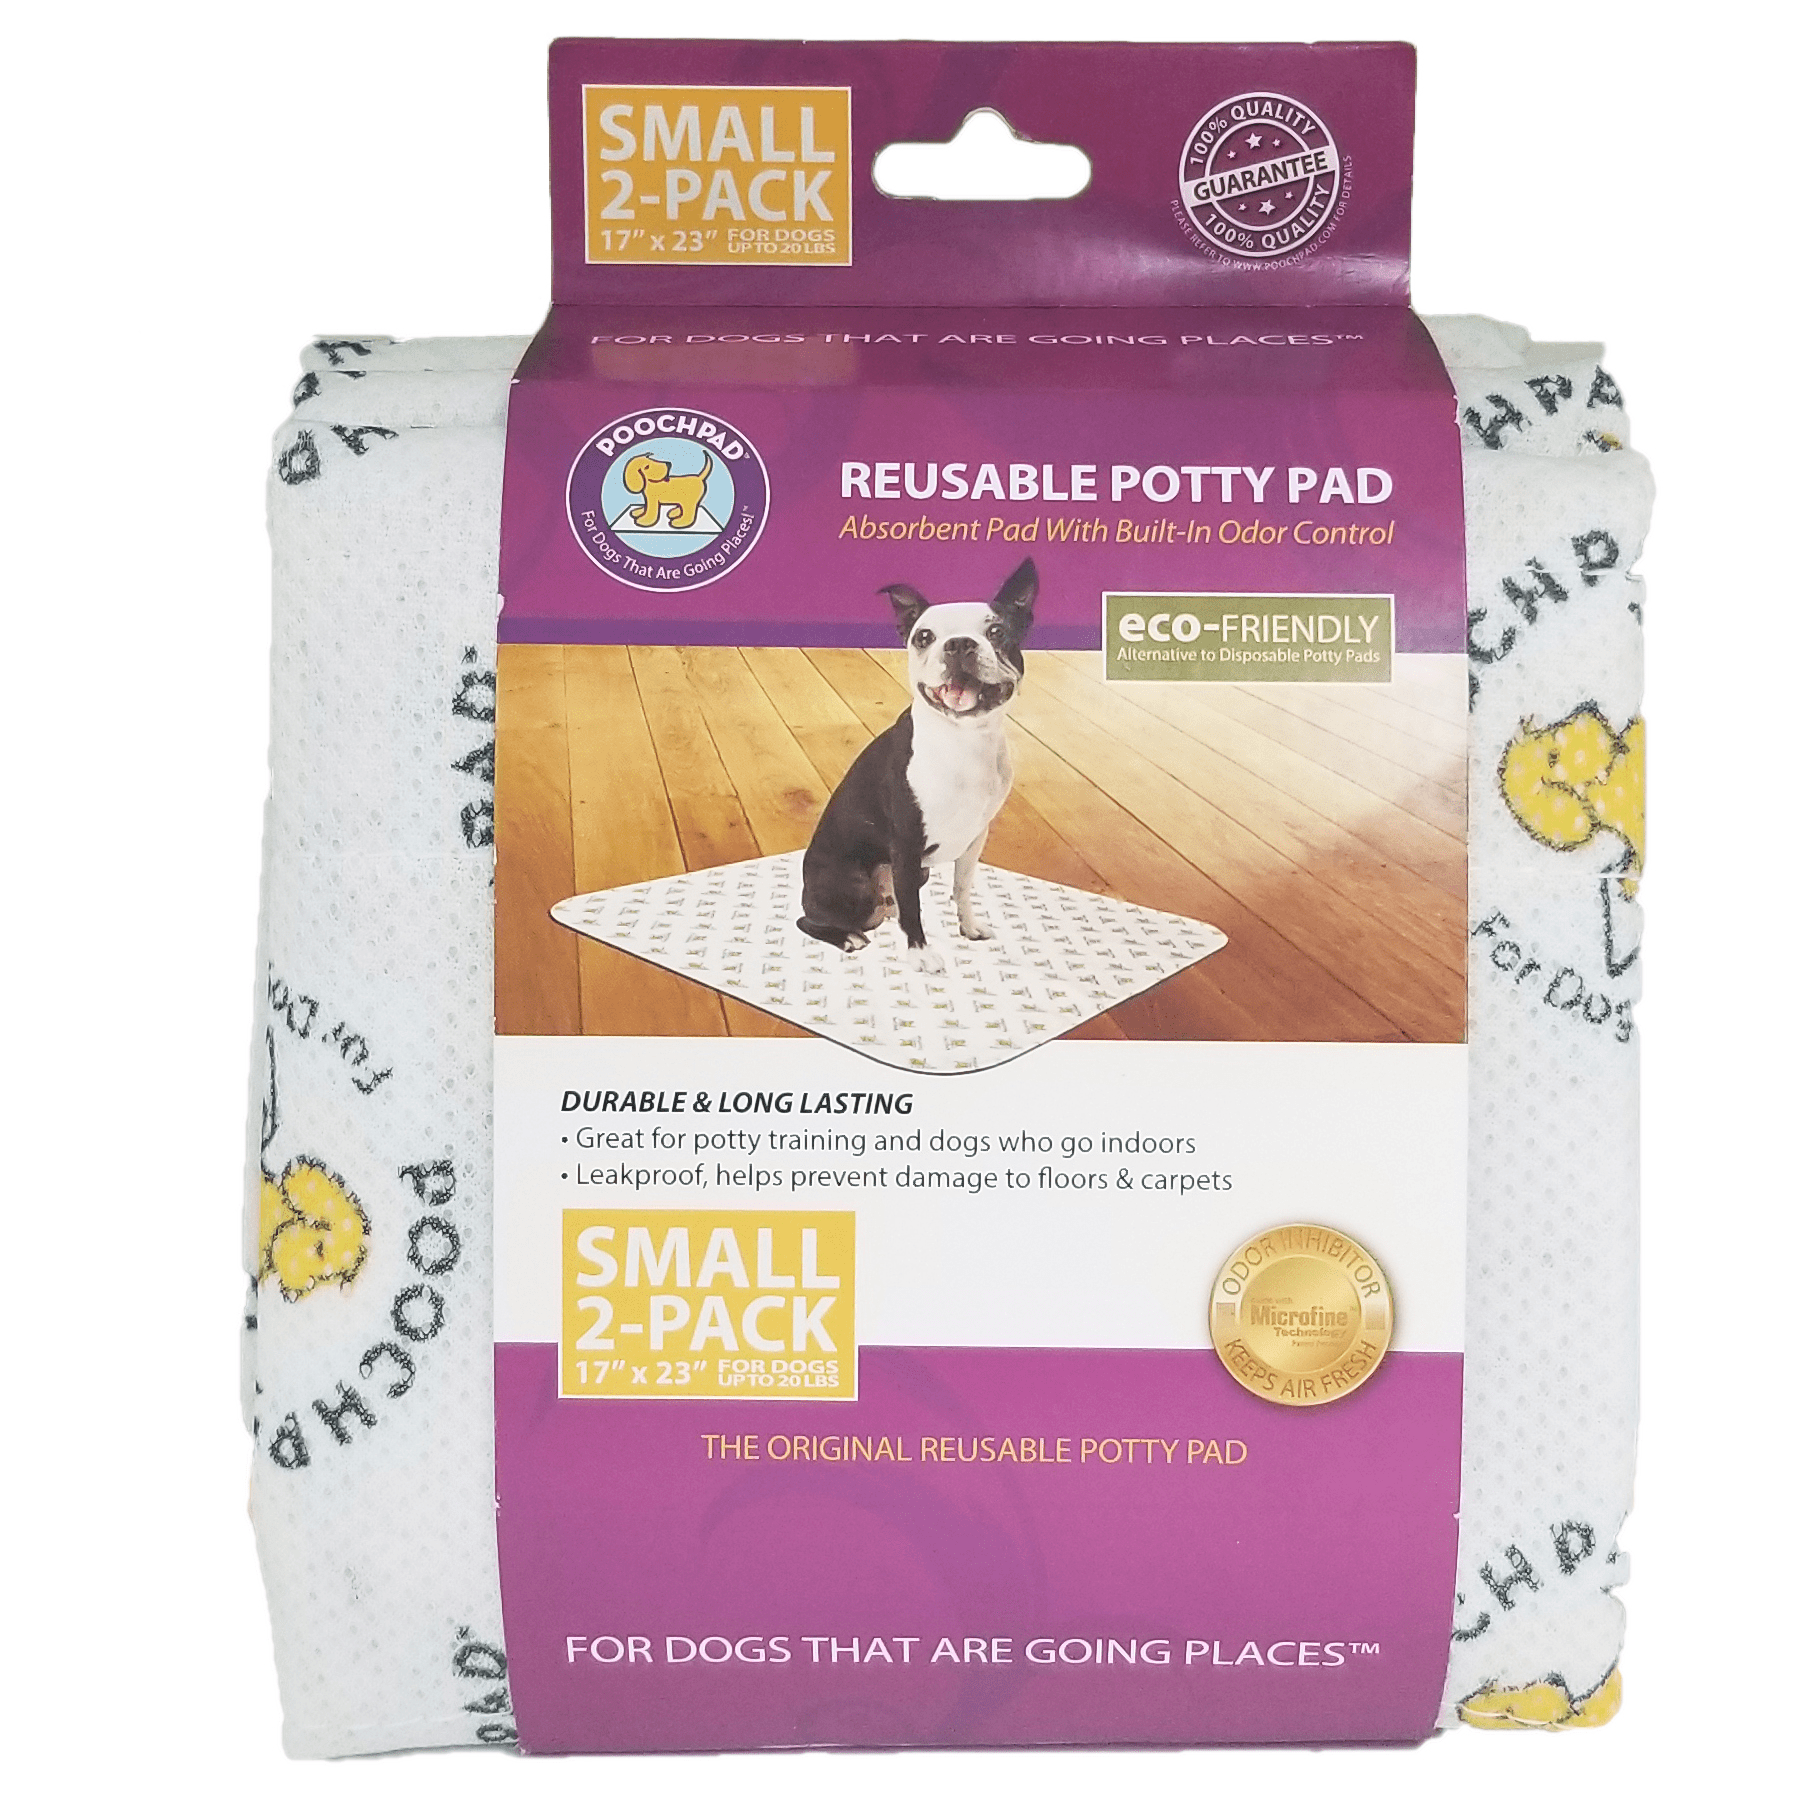 PoochPad Reusable Potty Pad for dogs - Small 2-Pack, 17x23